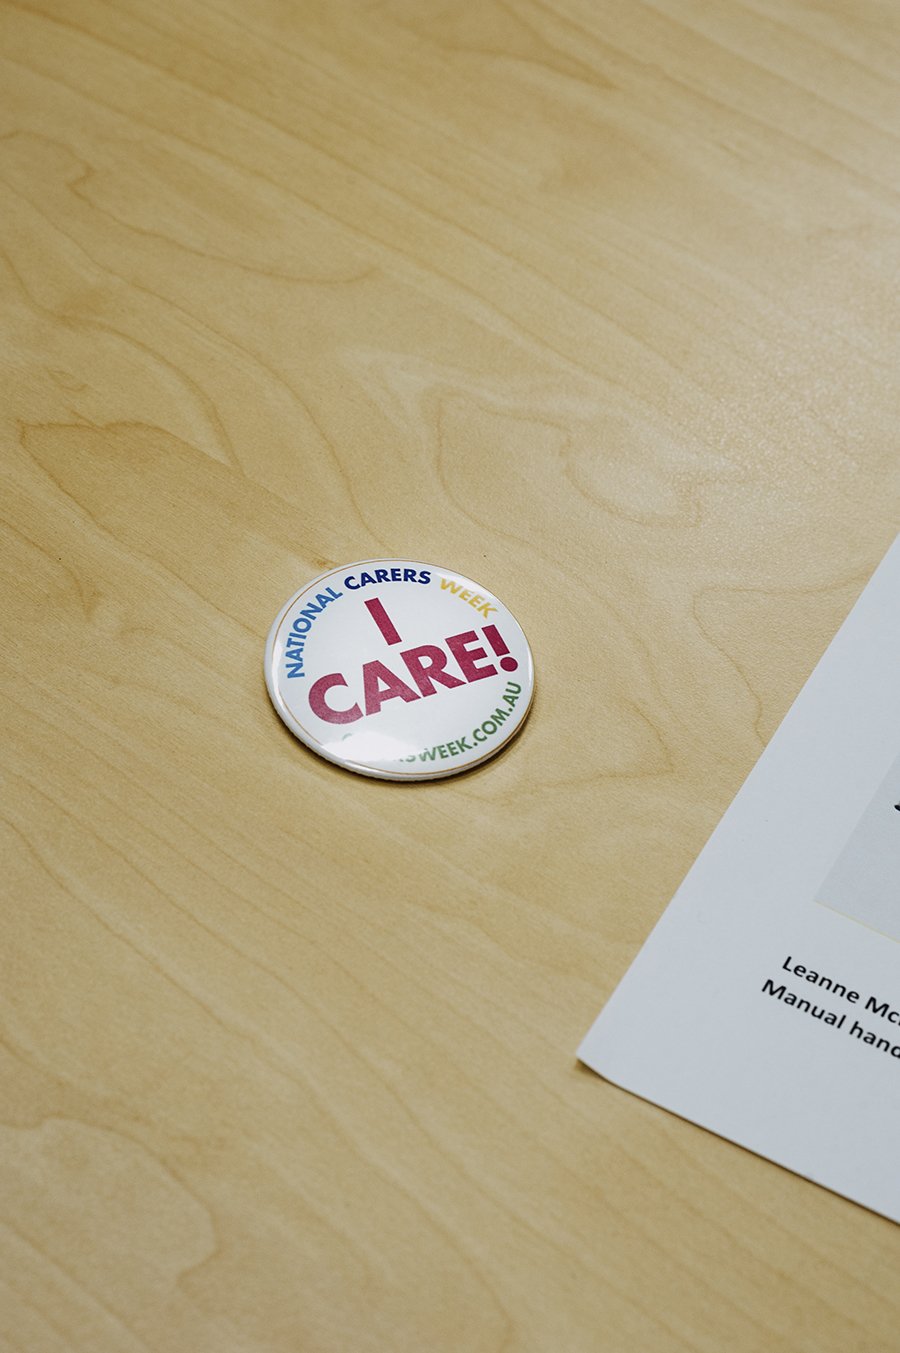 'I care' badge for National Carers' Week.